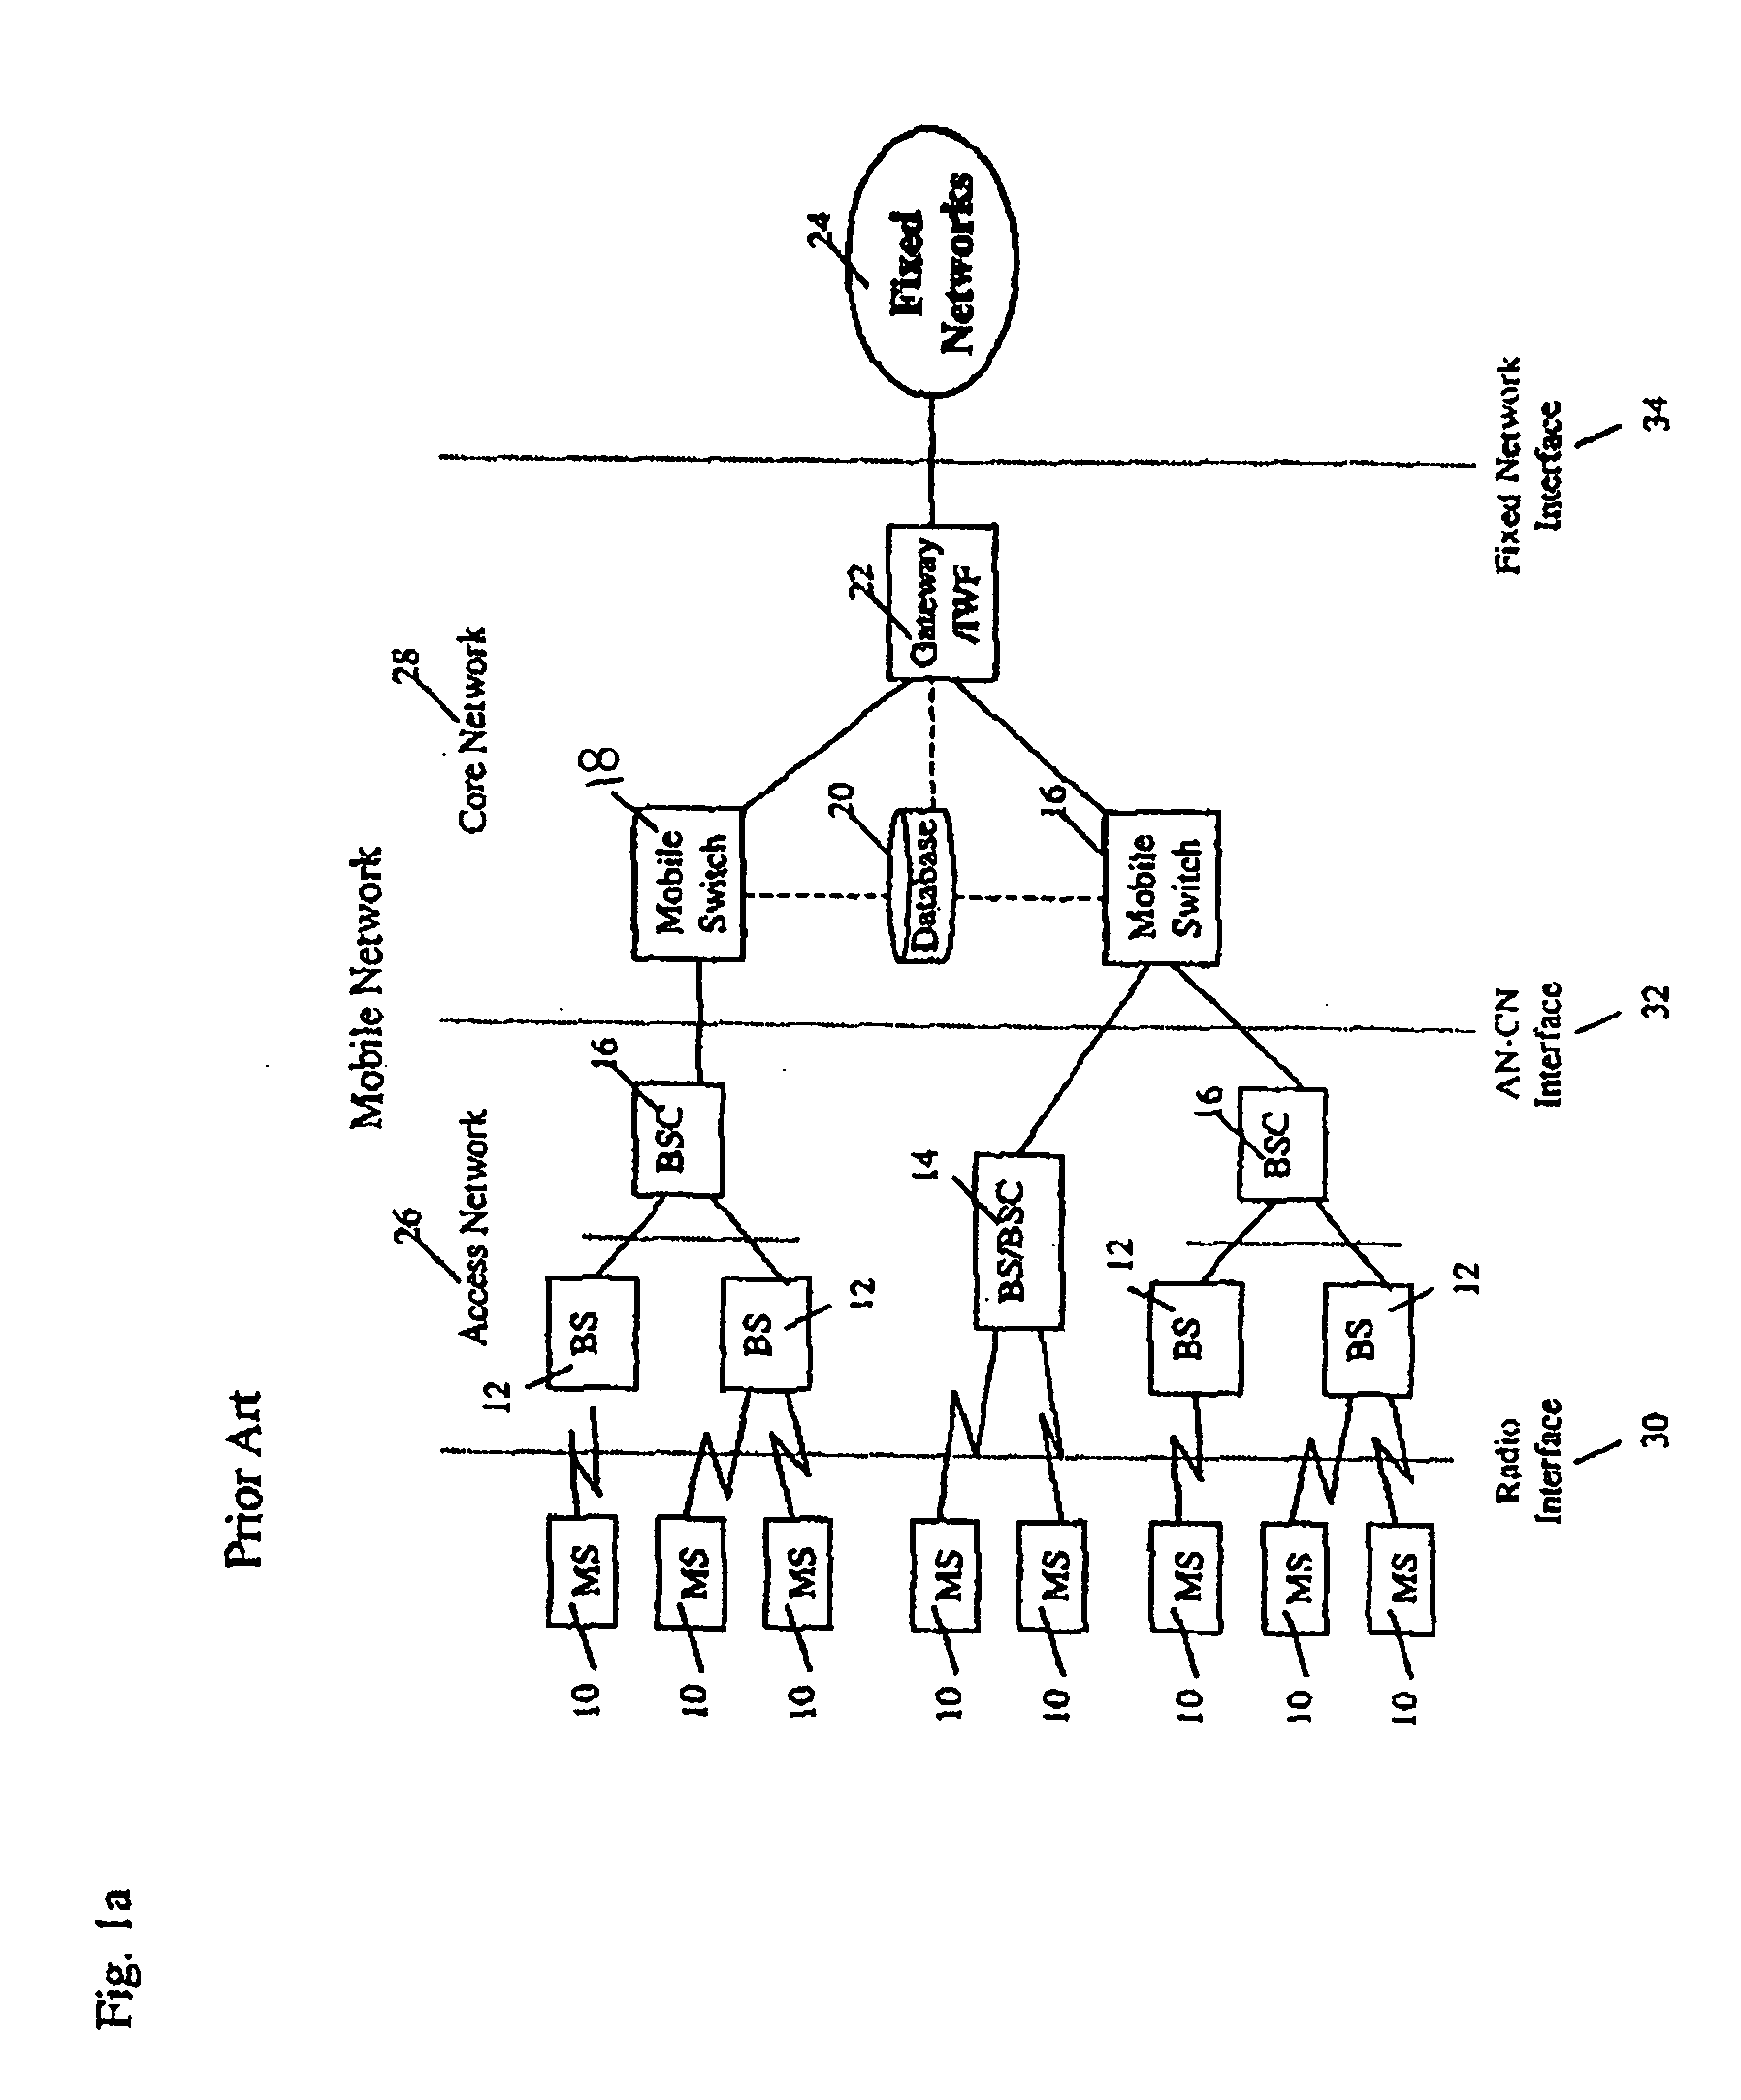 Apparatus and system to provide wireless data services through a wireless access integrated node